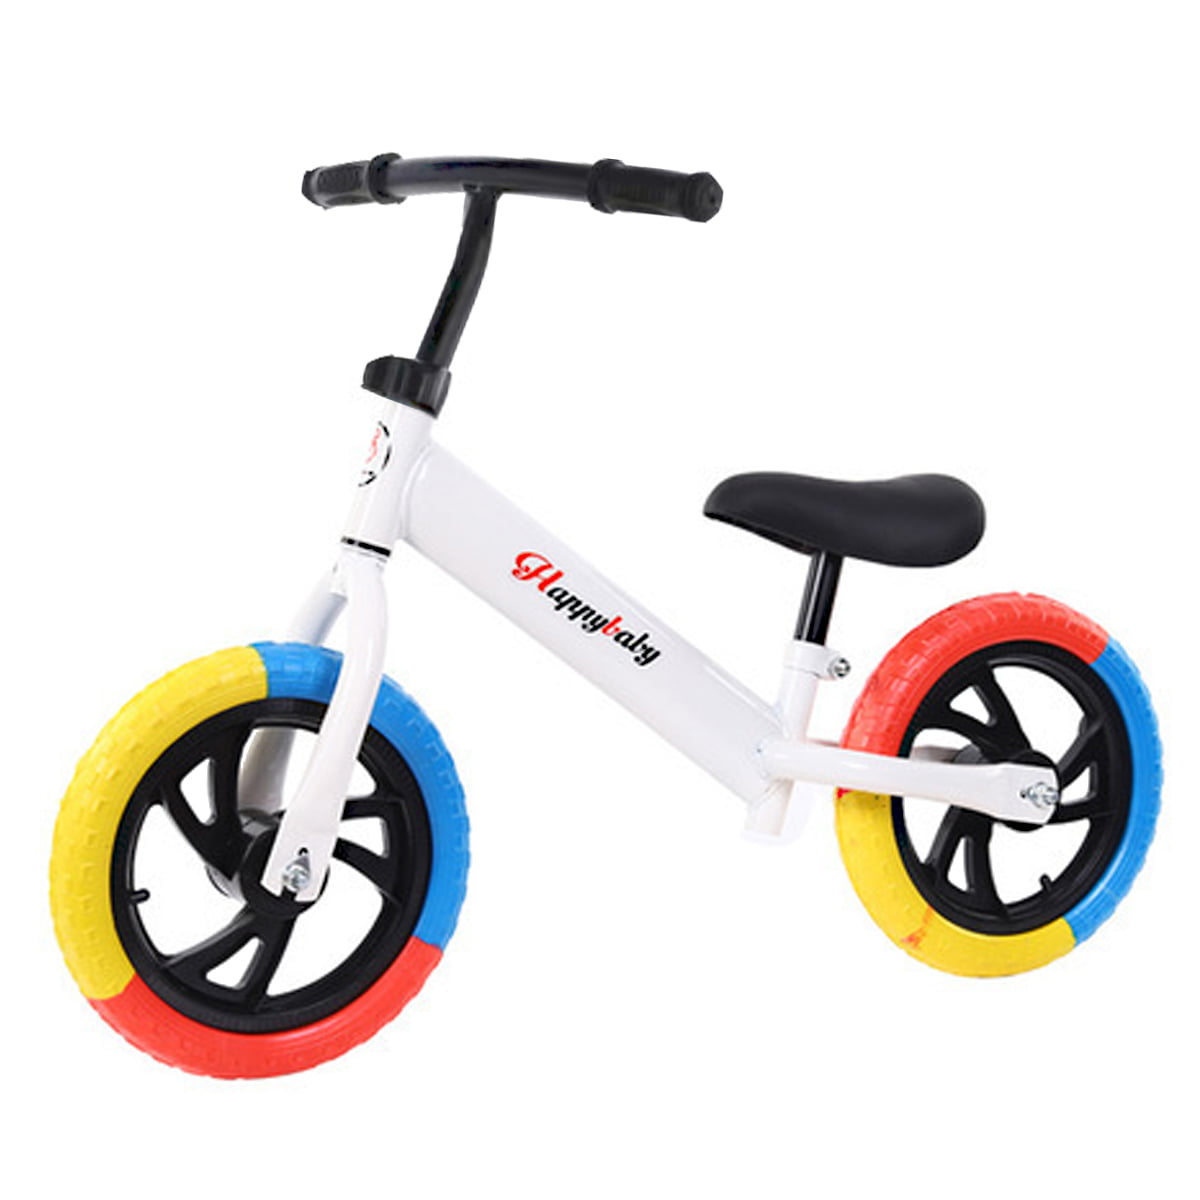 Kids Balance Bike Walker No Pedal Child Training Bicycle Toy for 2-7 years White 